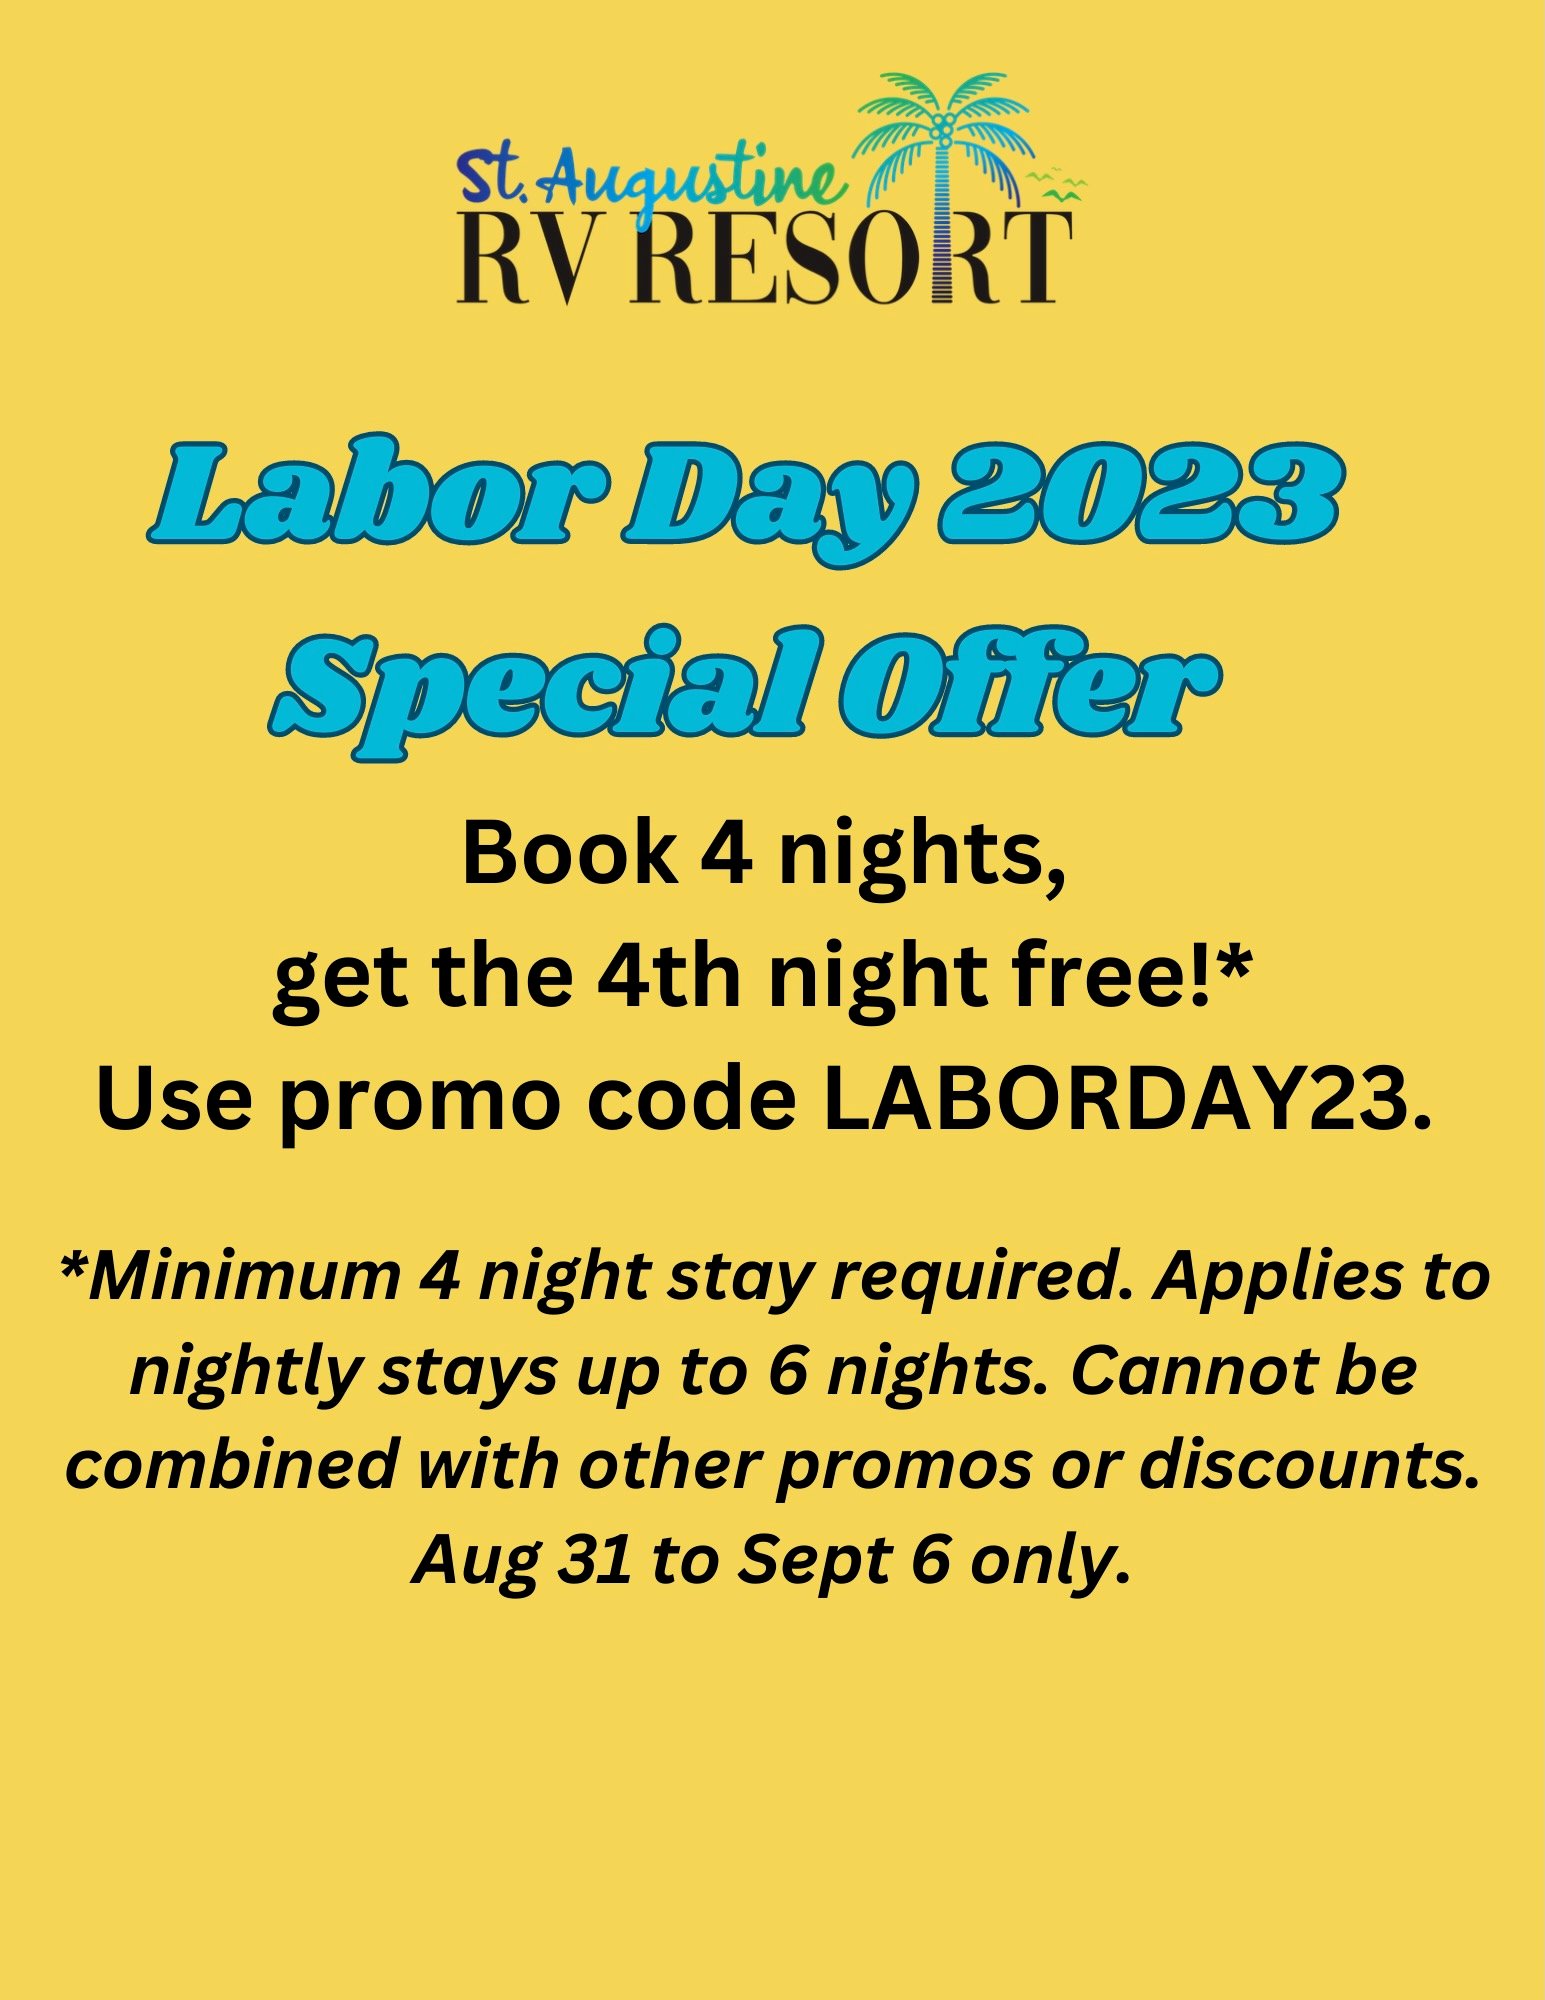 Labor Day 2023 Special Offer